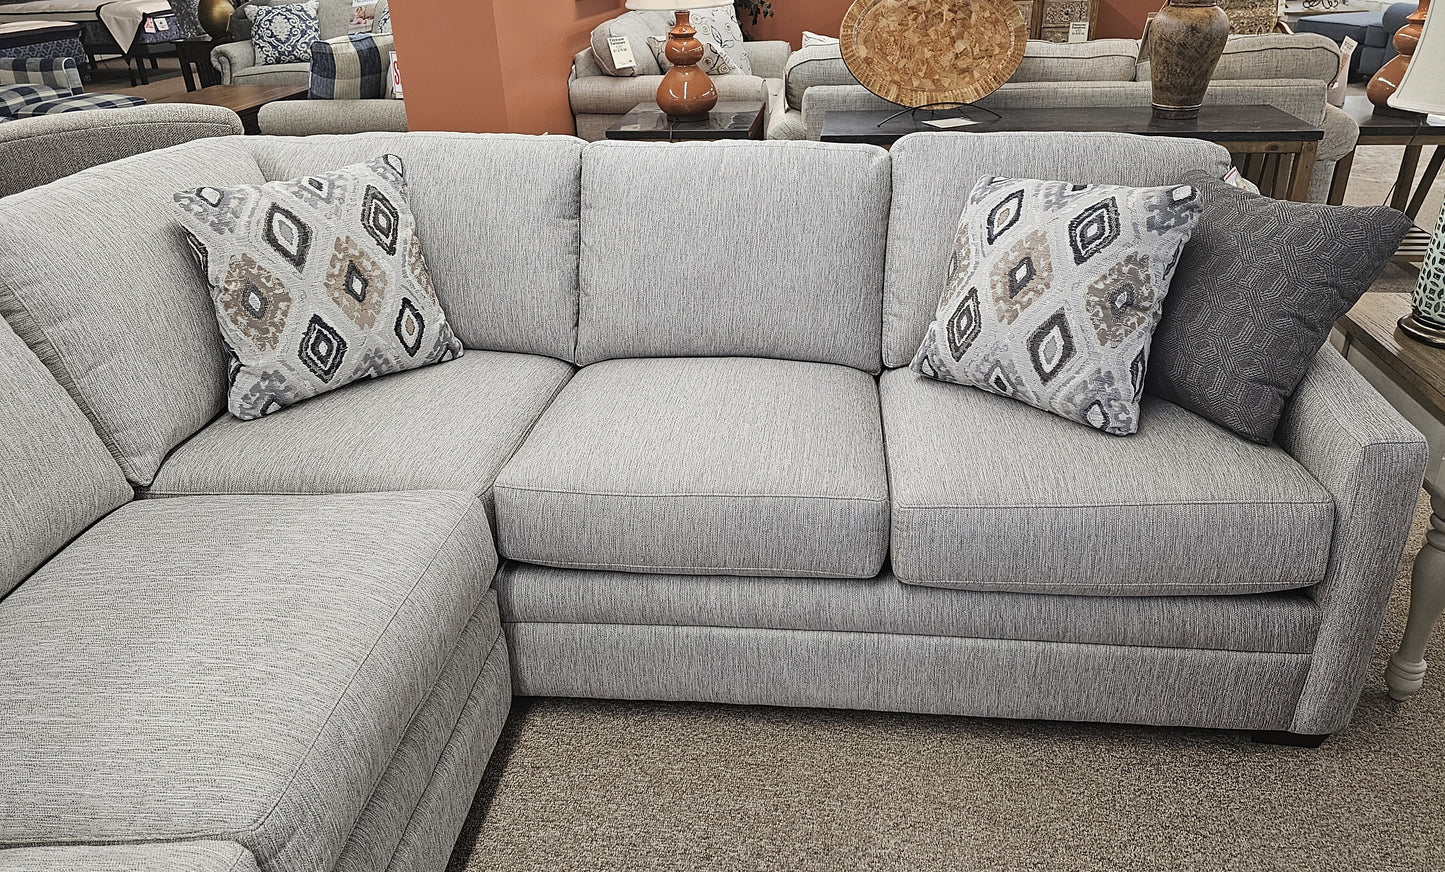 Sectional Sofa with Cuddler